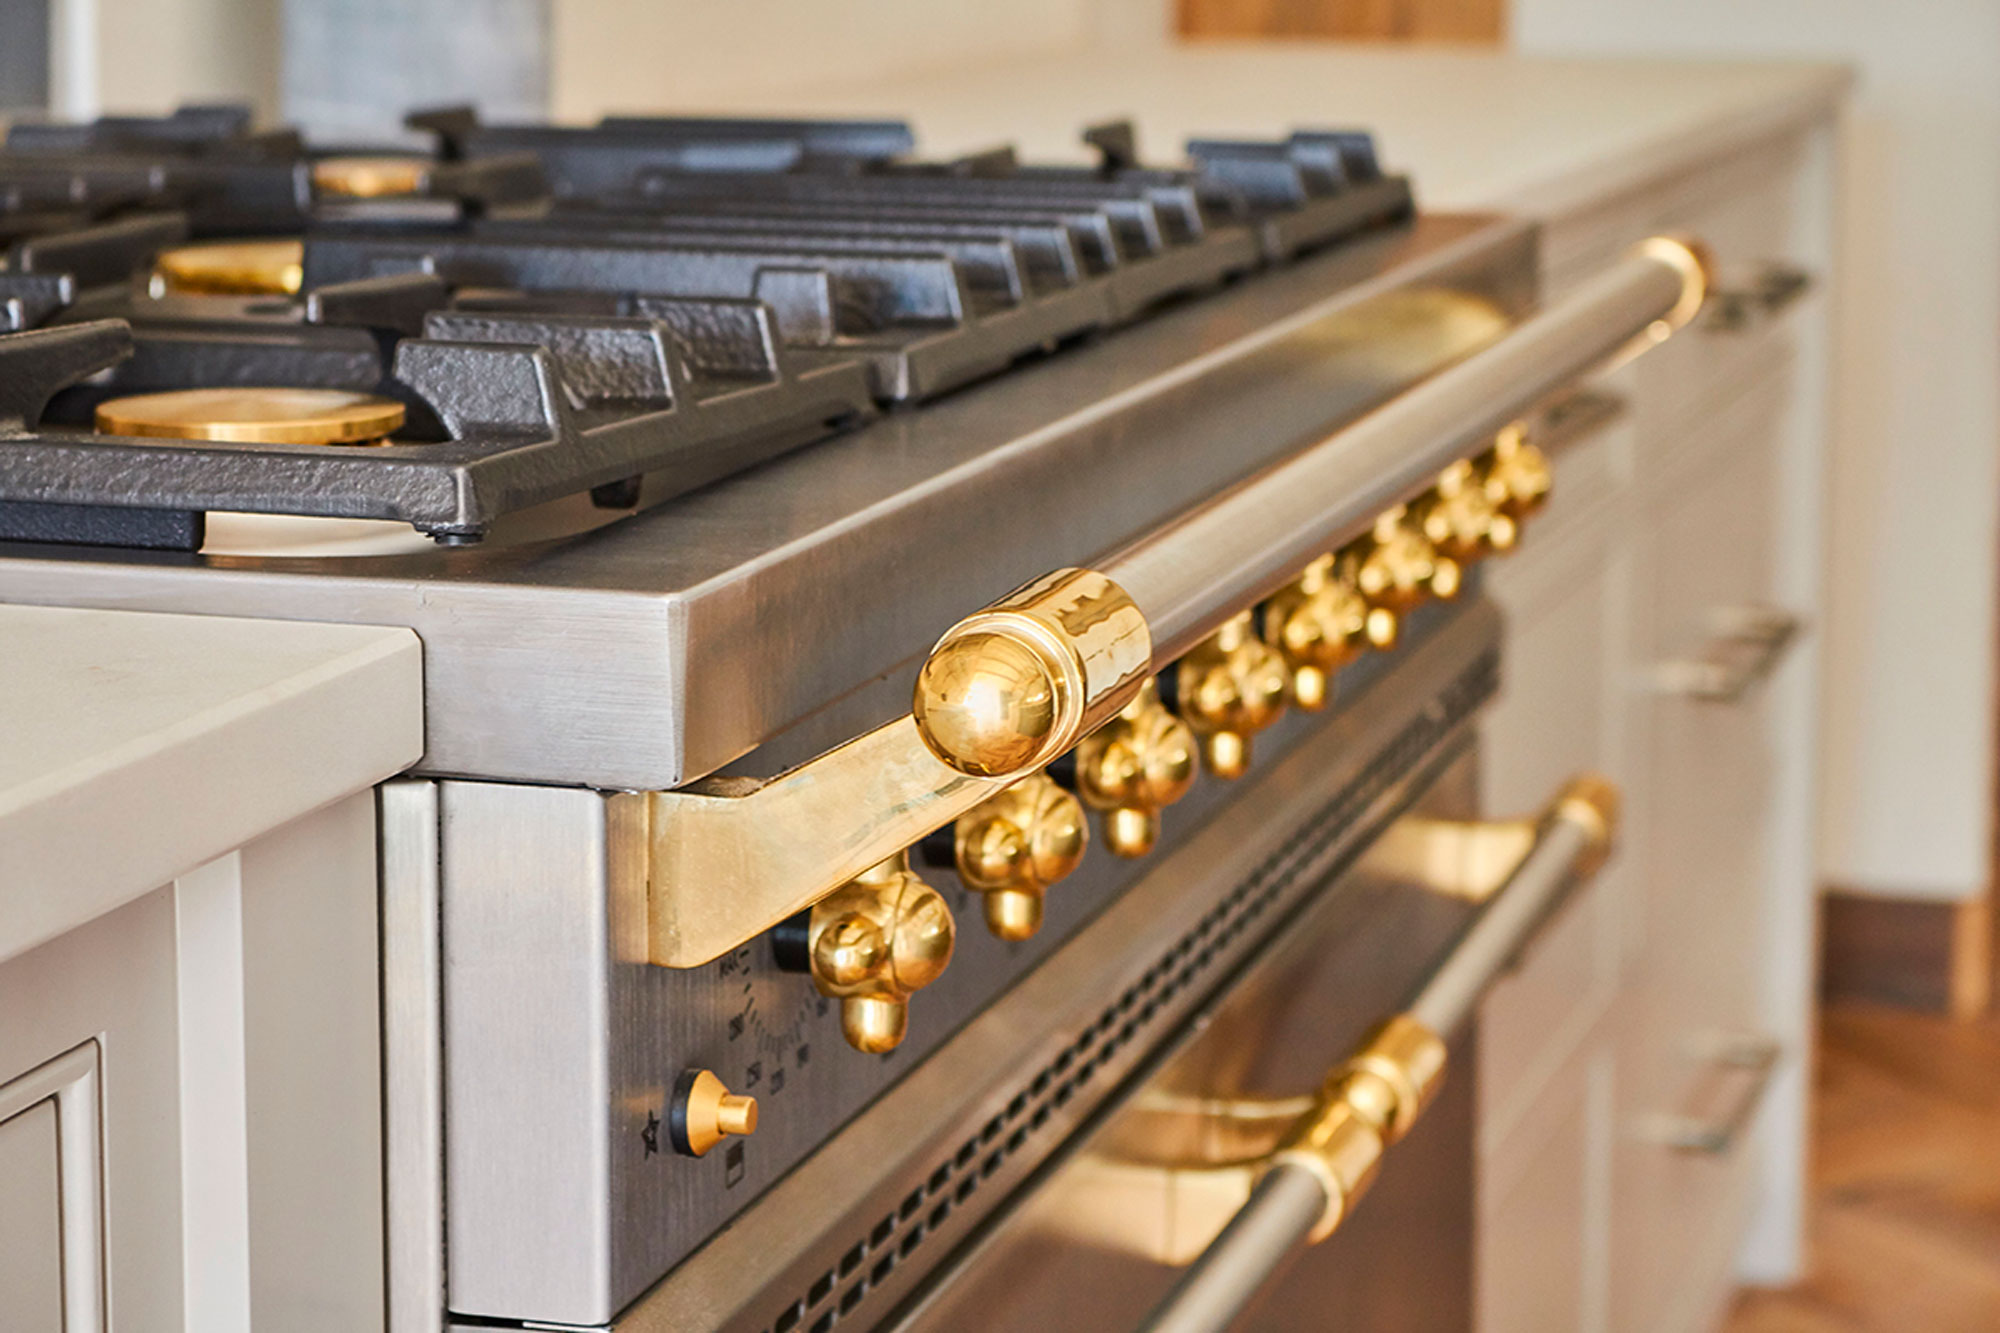 Stainless steel Lacanche gas range cooker with brass detail